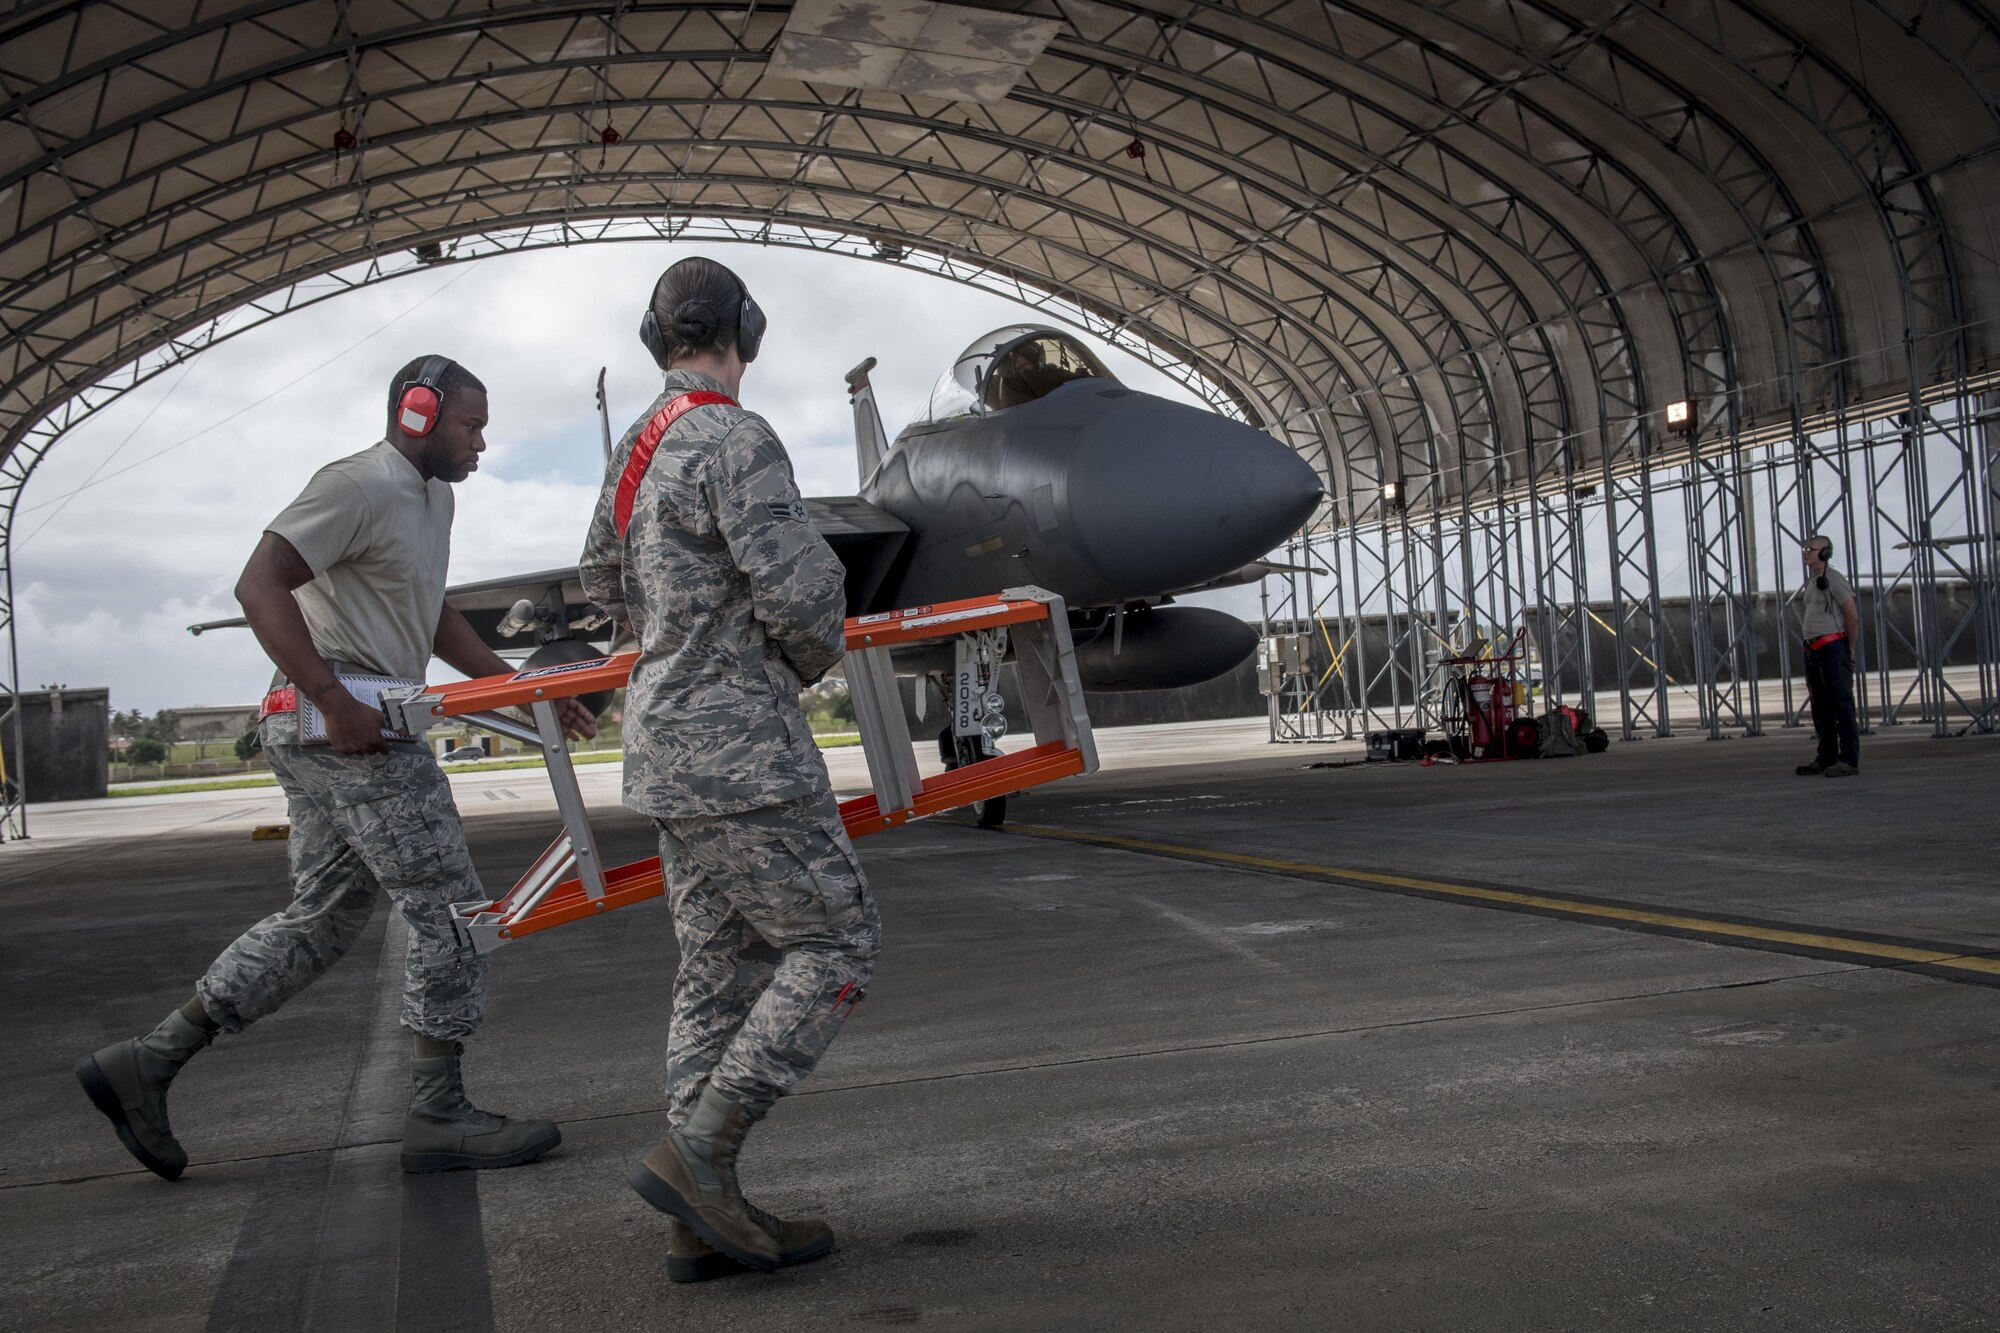 U.S. Air Force weapons Airmen from the 67th Aircraft maintenance Squadron pass an F-15 Eagle during annual exercise Cope North Feb, 23, 2017 on the flightline of Andersen Air Force Base, Guam. During the exercise, weapons teams arm jets one-by-one before they are marshaled out for training missions with aircraft from the Japan Air Self-Defense Force and Royal Australian Air Force. (U.S. Air Force photo by Senior Airman John Linzmeier)